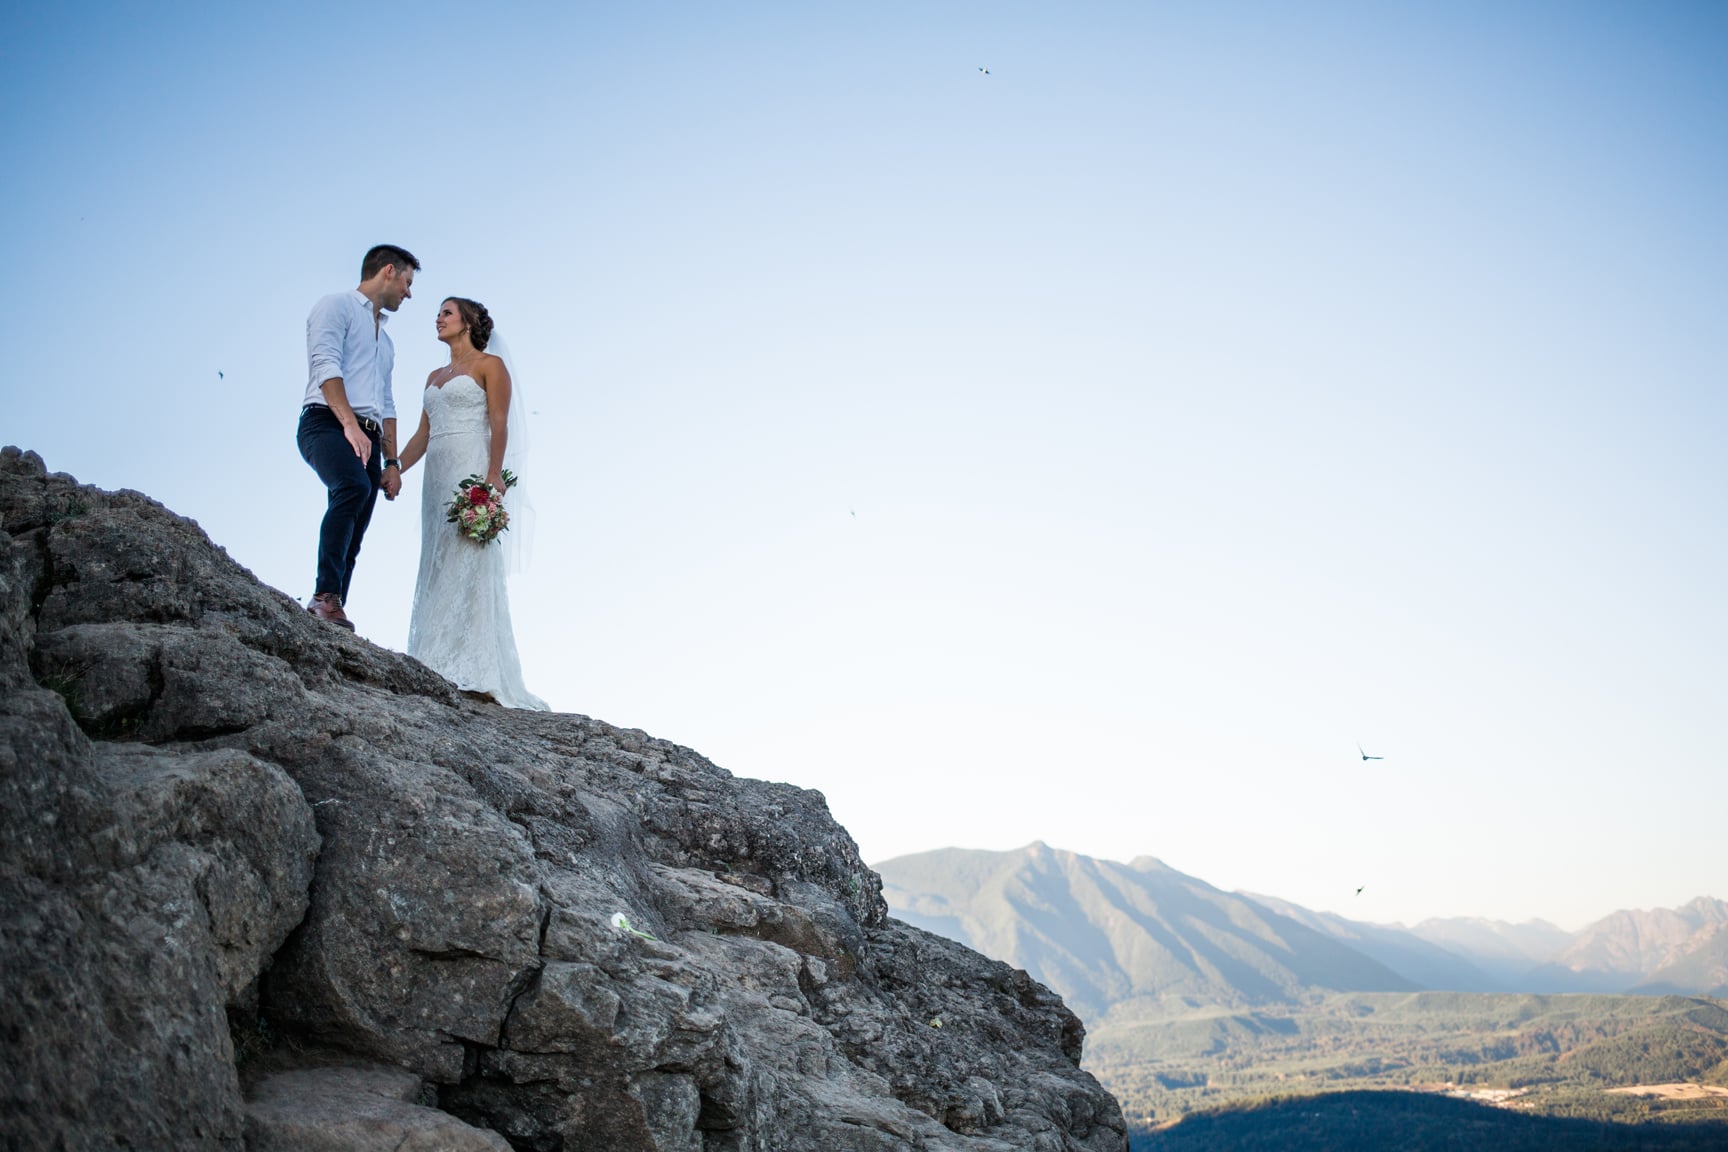 Bride and groom at Rattlesnake Ledge by Alexandra Knight Photography.